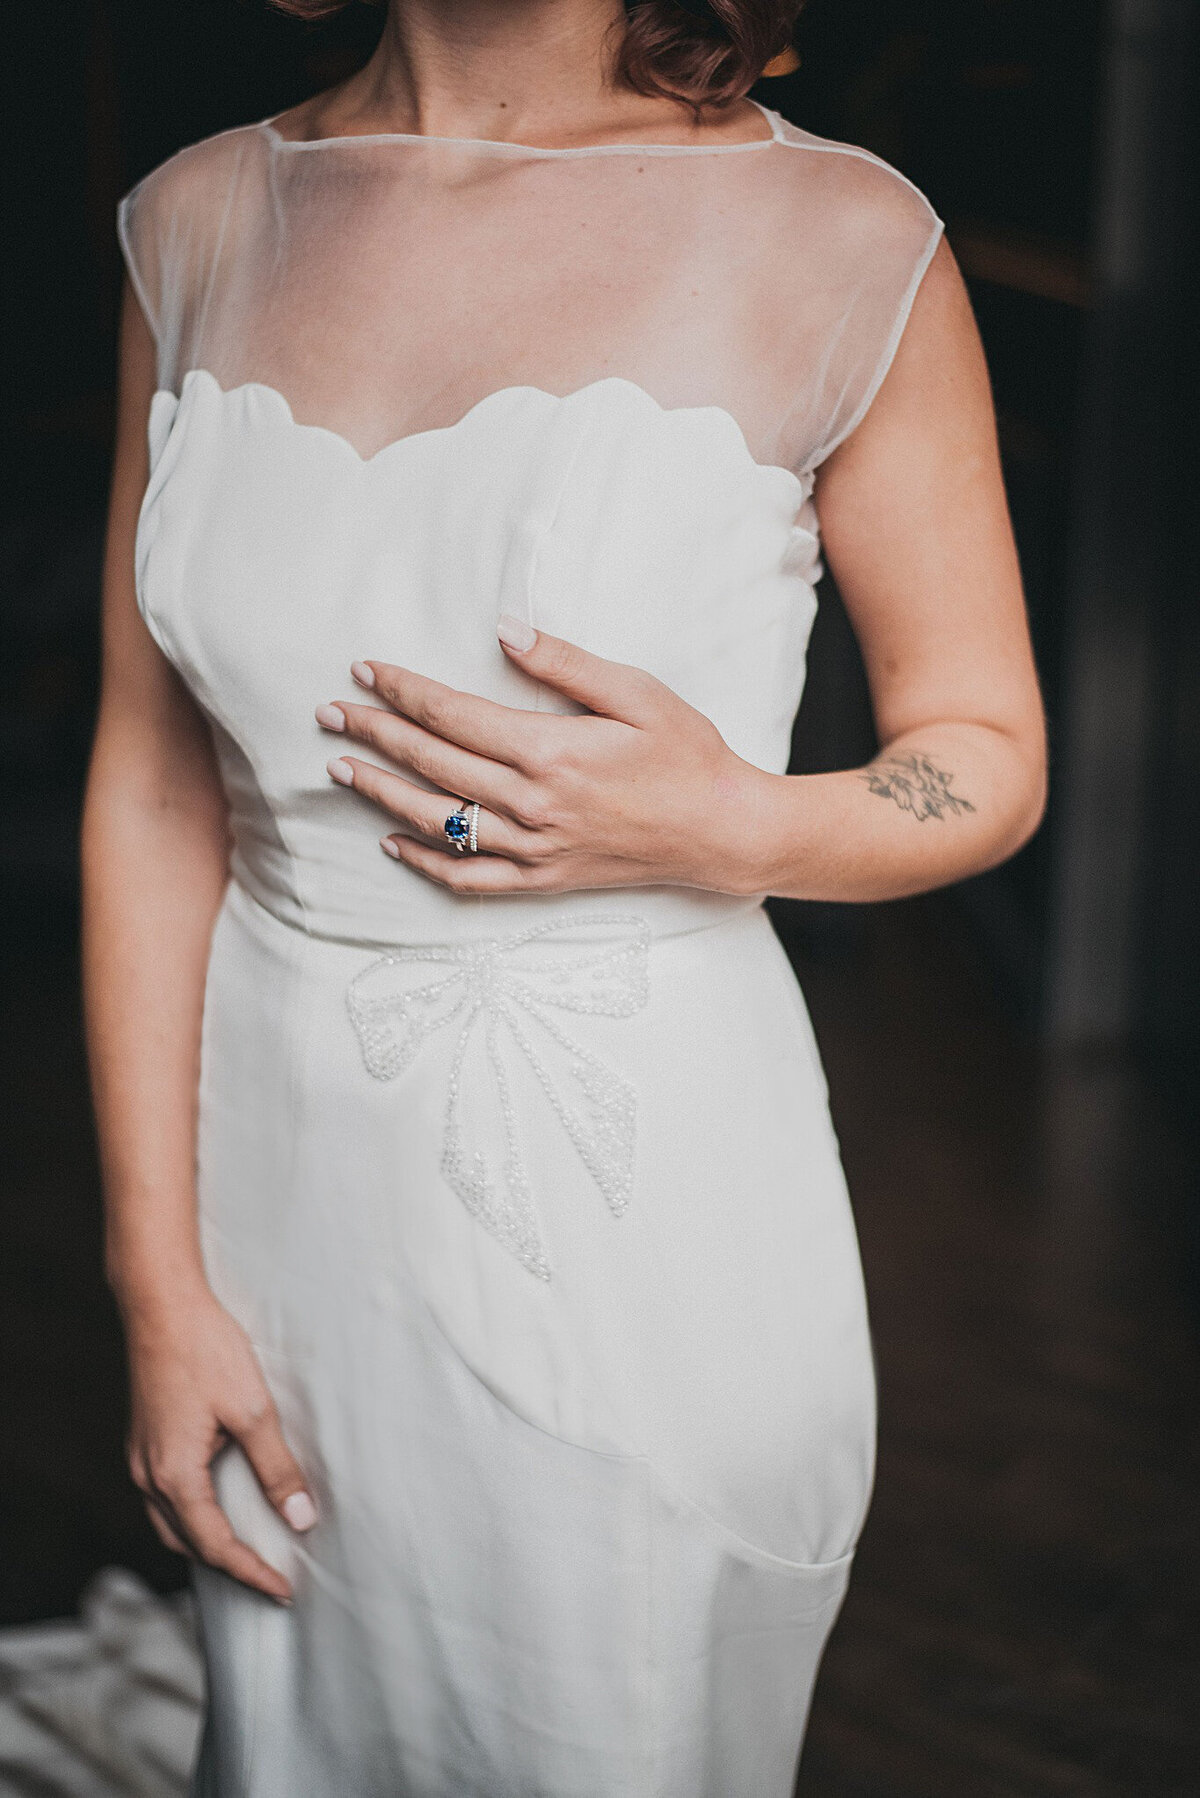 The details on the body of the Zara bridal style are what make this crepe wedding gown stand out. The intricate seamlines on the waist and hips are accented with a 2D beaded bow.